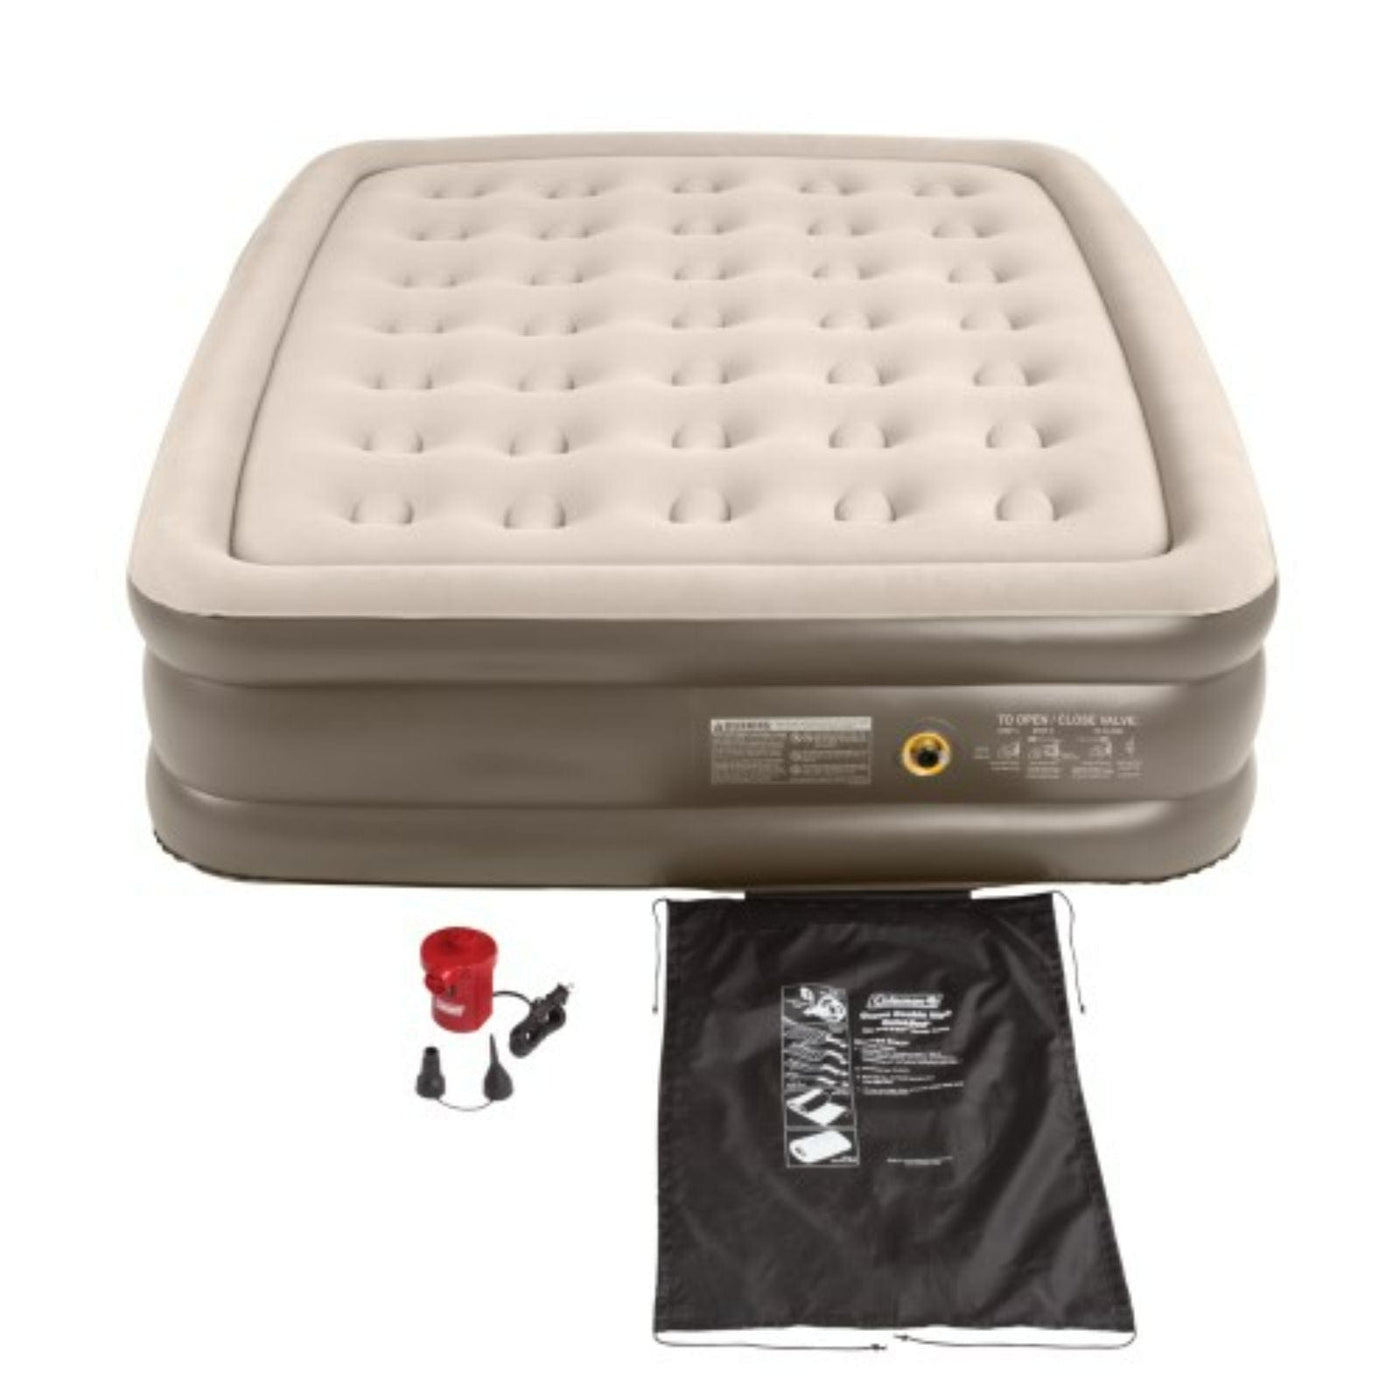 Coleman Coleman Airbed Queen Dh 120V Combo C002 2000018319 Camping And Outdoor